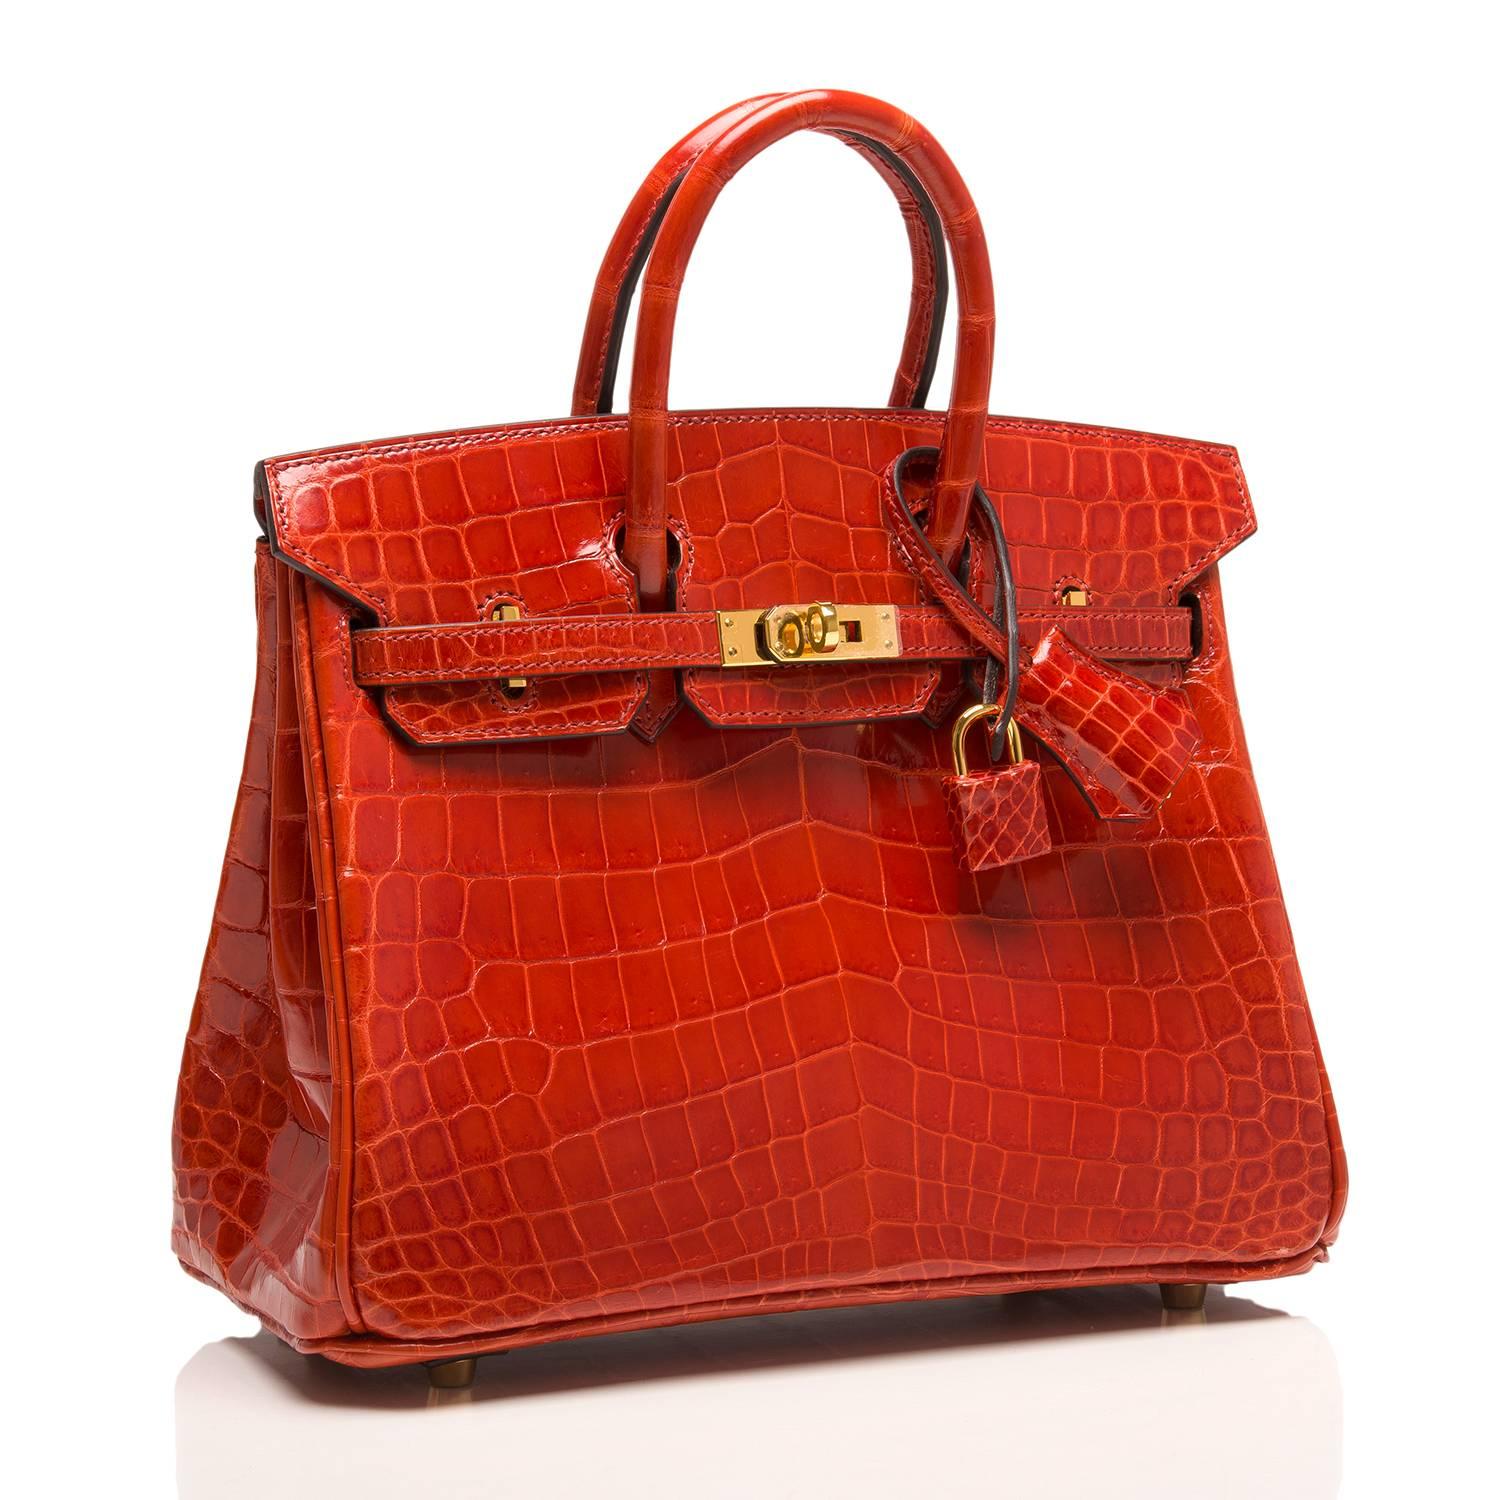 Hermes Sanguine Birkin 25cm in shiny niloticus crocodile with gold hardware.

This style features tonal stitching, front toggle closure, clochette with lock and two keys, and double rolled handles.

The interior is lined in Sanguine chevre with